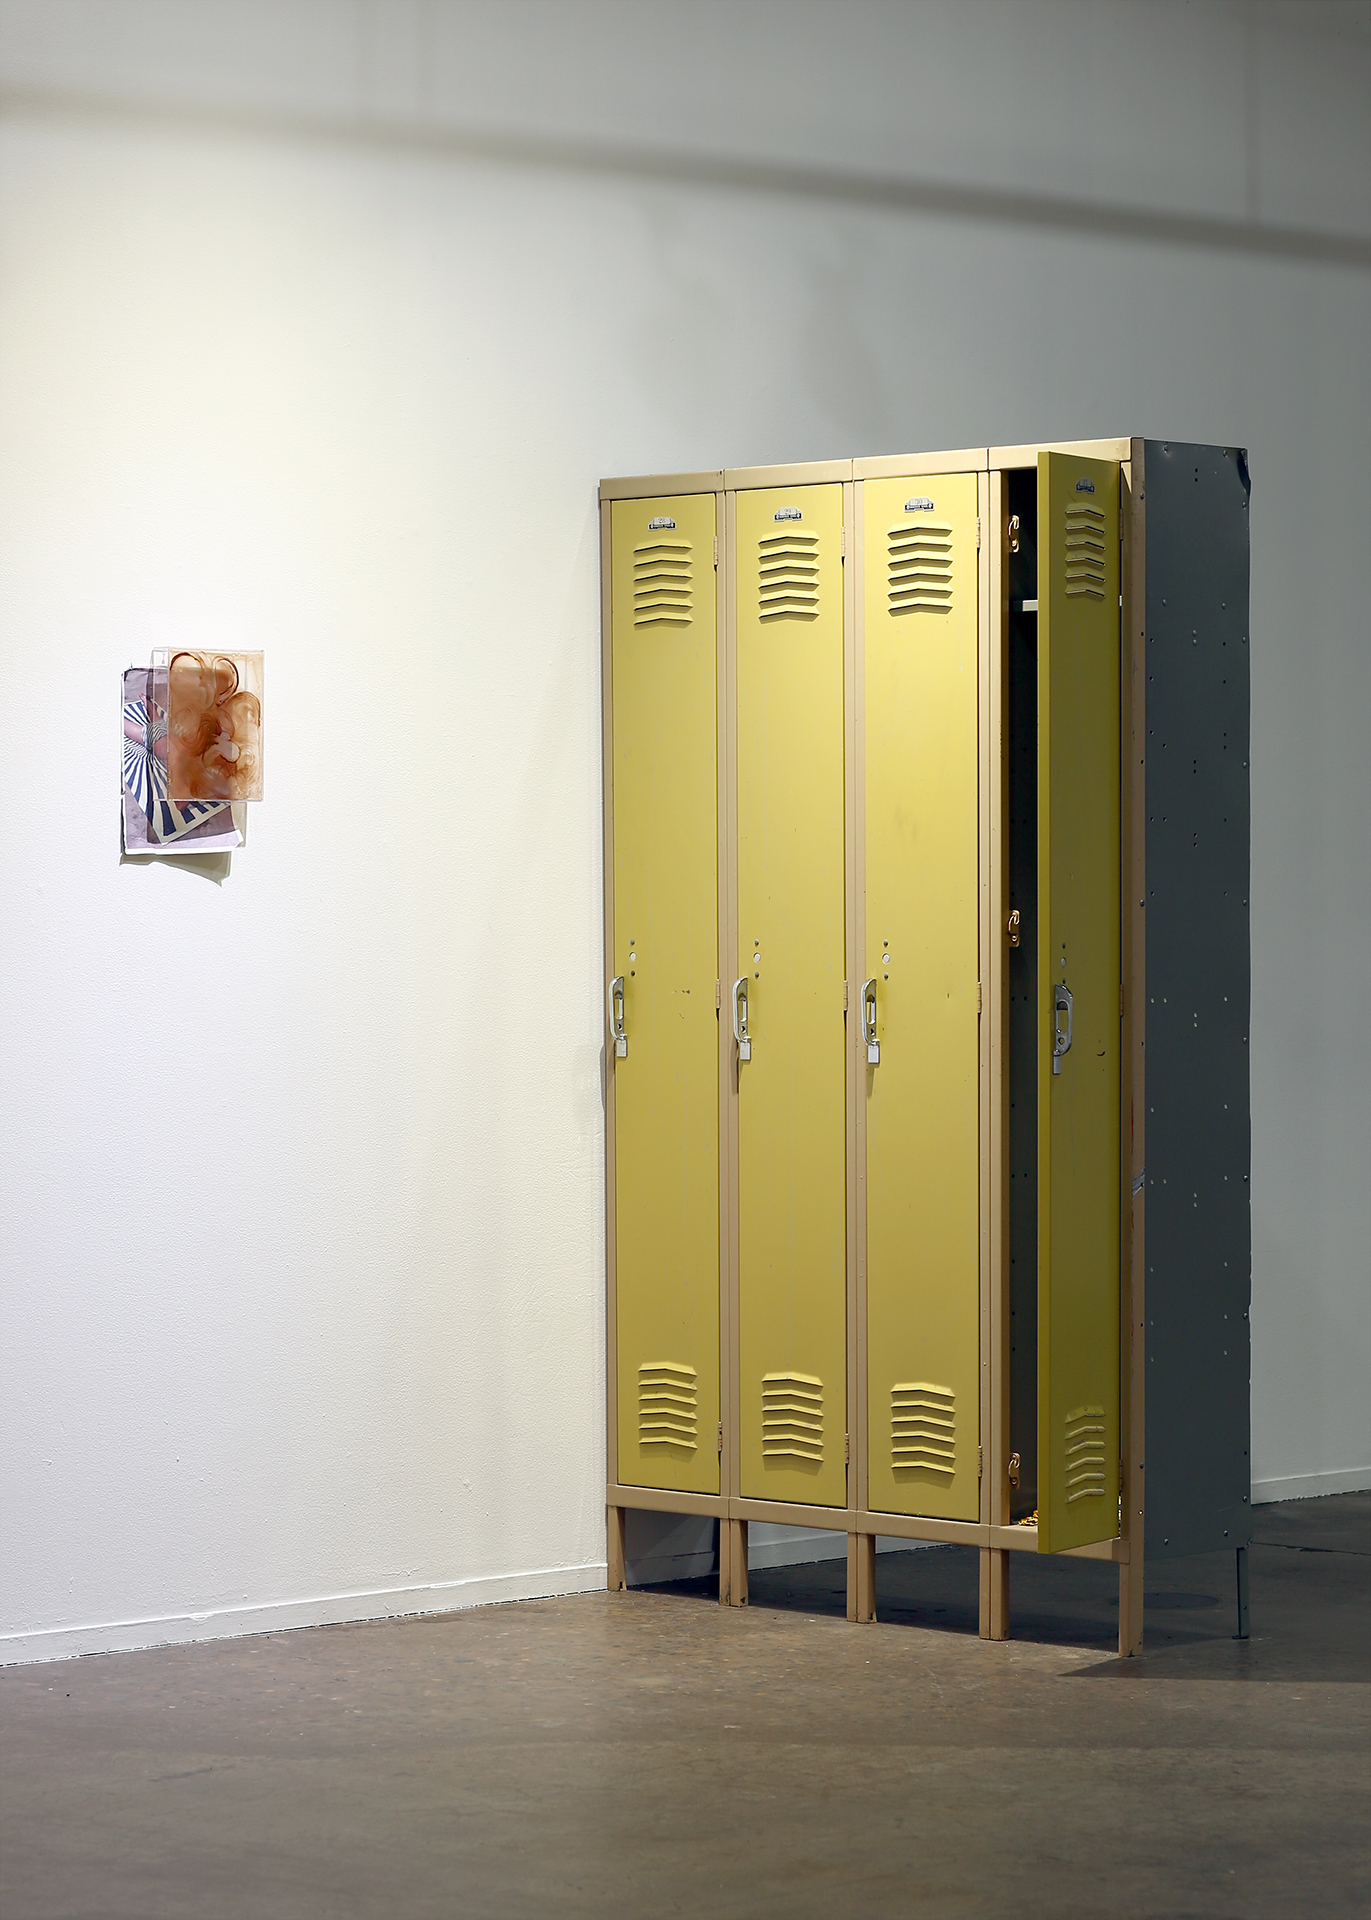   Still life (after Mel Roberts)  /  Lockers  Magazine printed photograph by Mel Roberts, oil on acrylic / Aluminum lockers with pansy flowers 48” x 78” x 12” 2019 